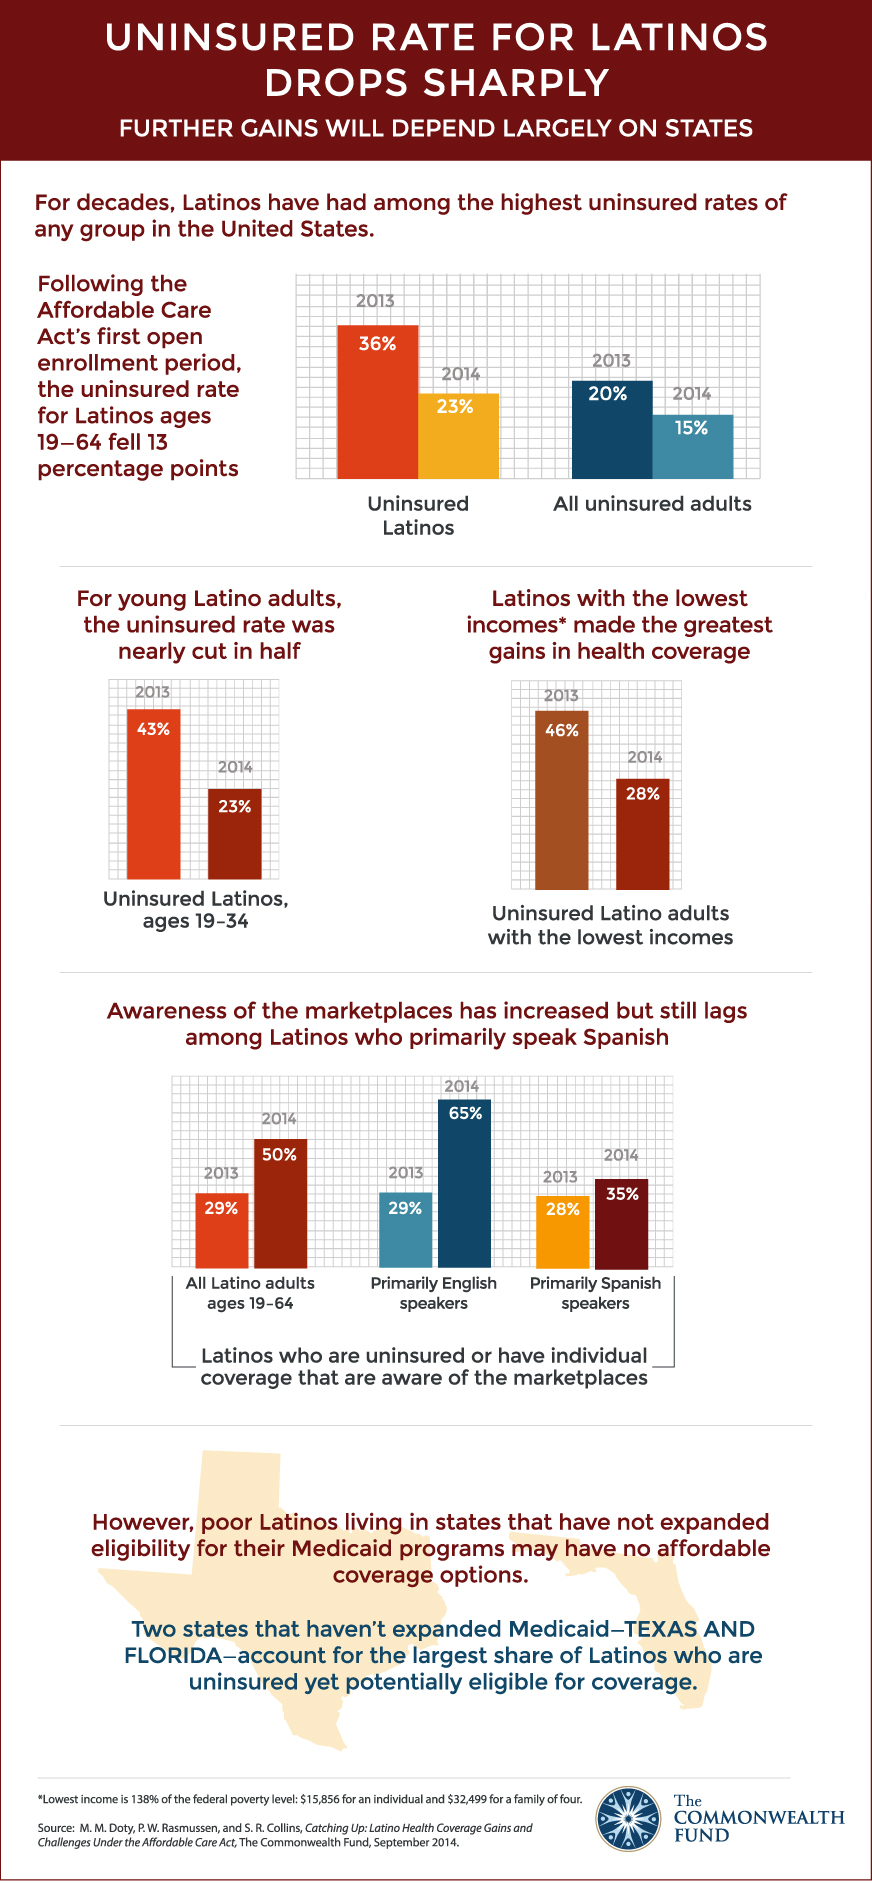 IMPORTED: www_commonwealthfund_org____media_images_infographics_2014_sep_doty_latino_infographic_924.jpg